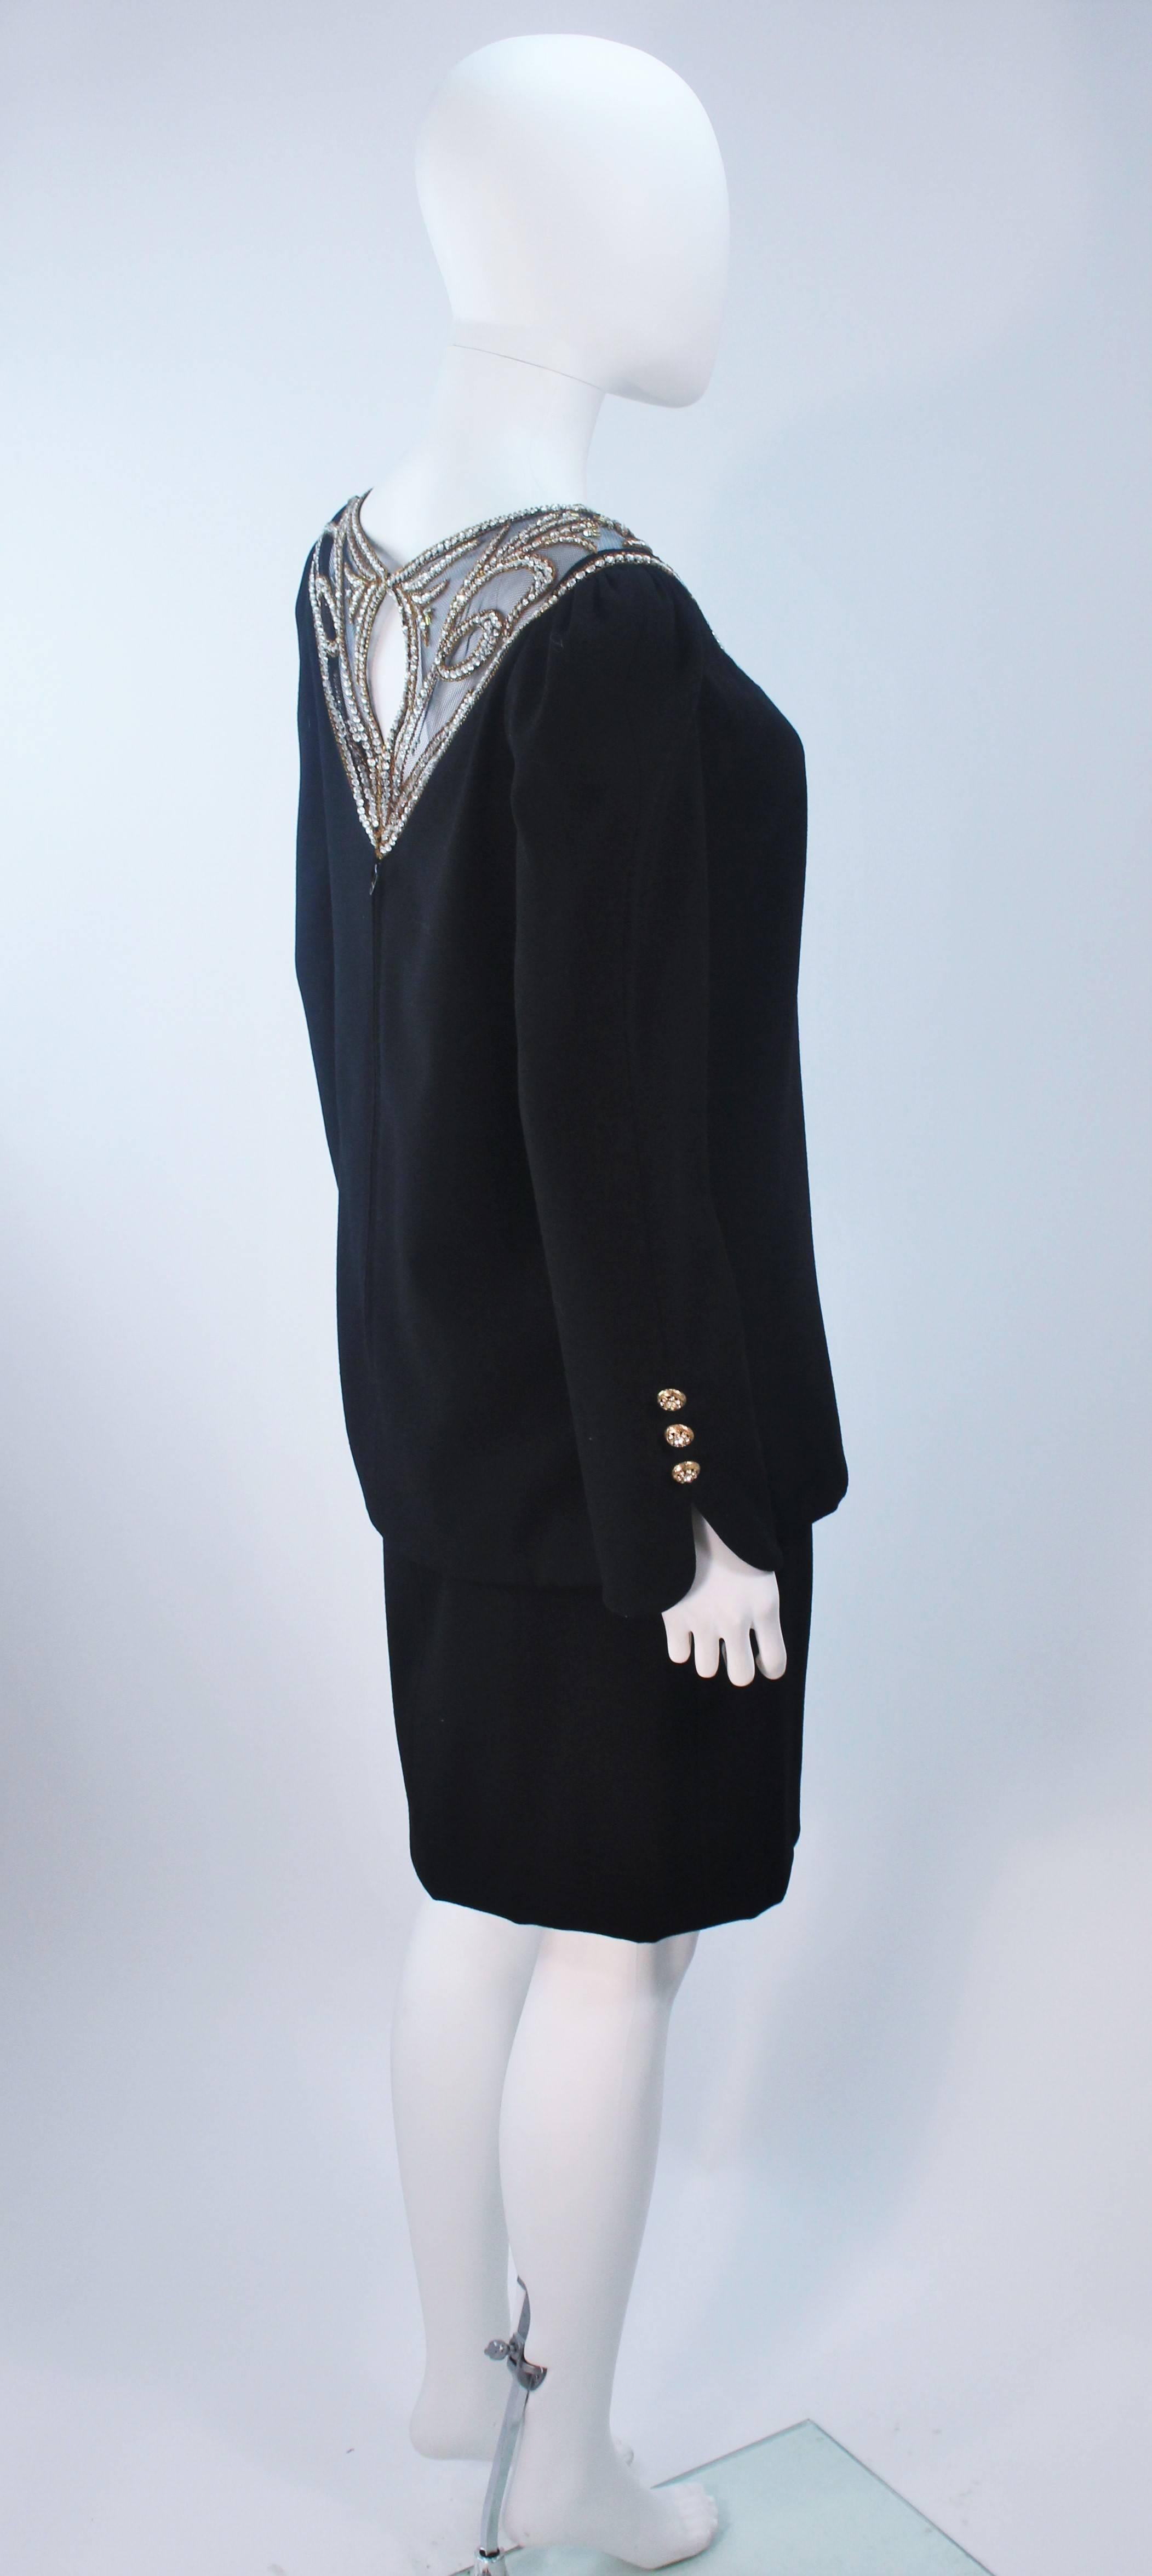 BOB MACKIE Black Skirt Suit Ensemble with Sheer Embellished Accents Size 4-6 For Sale 1